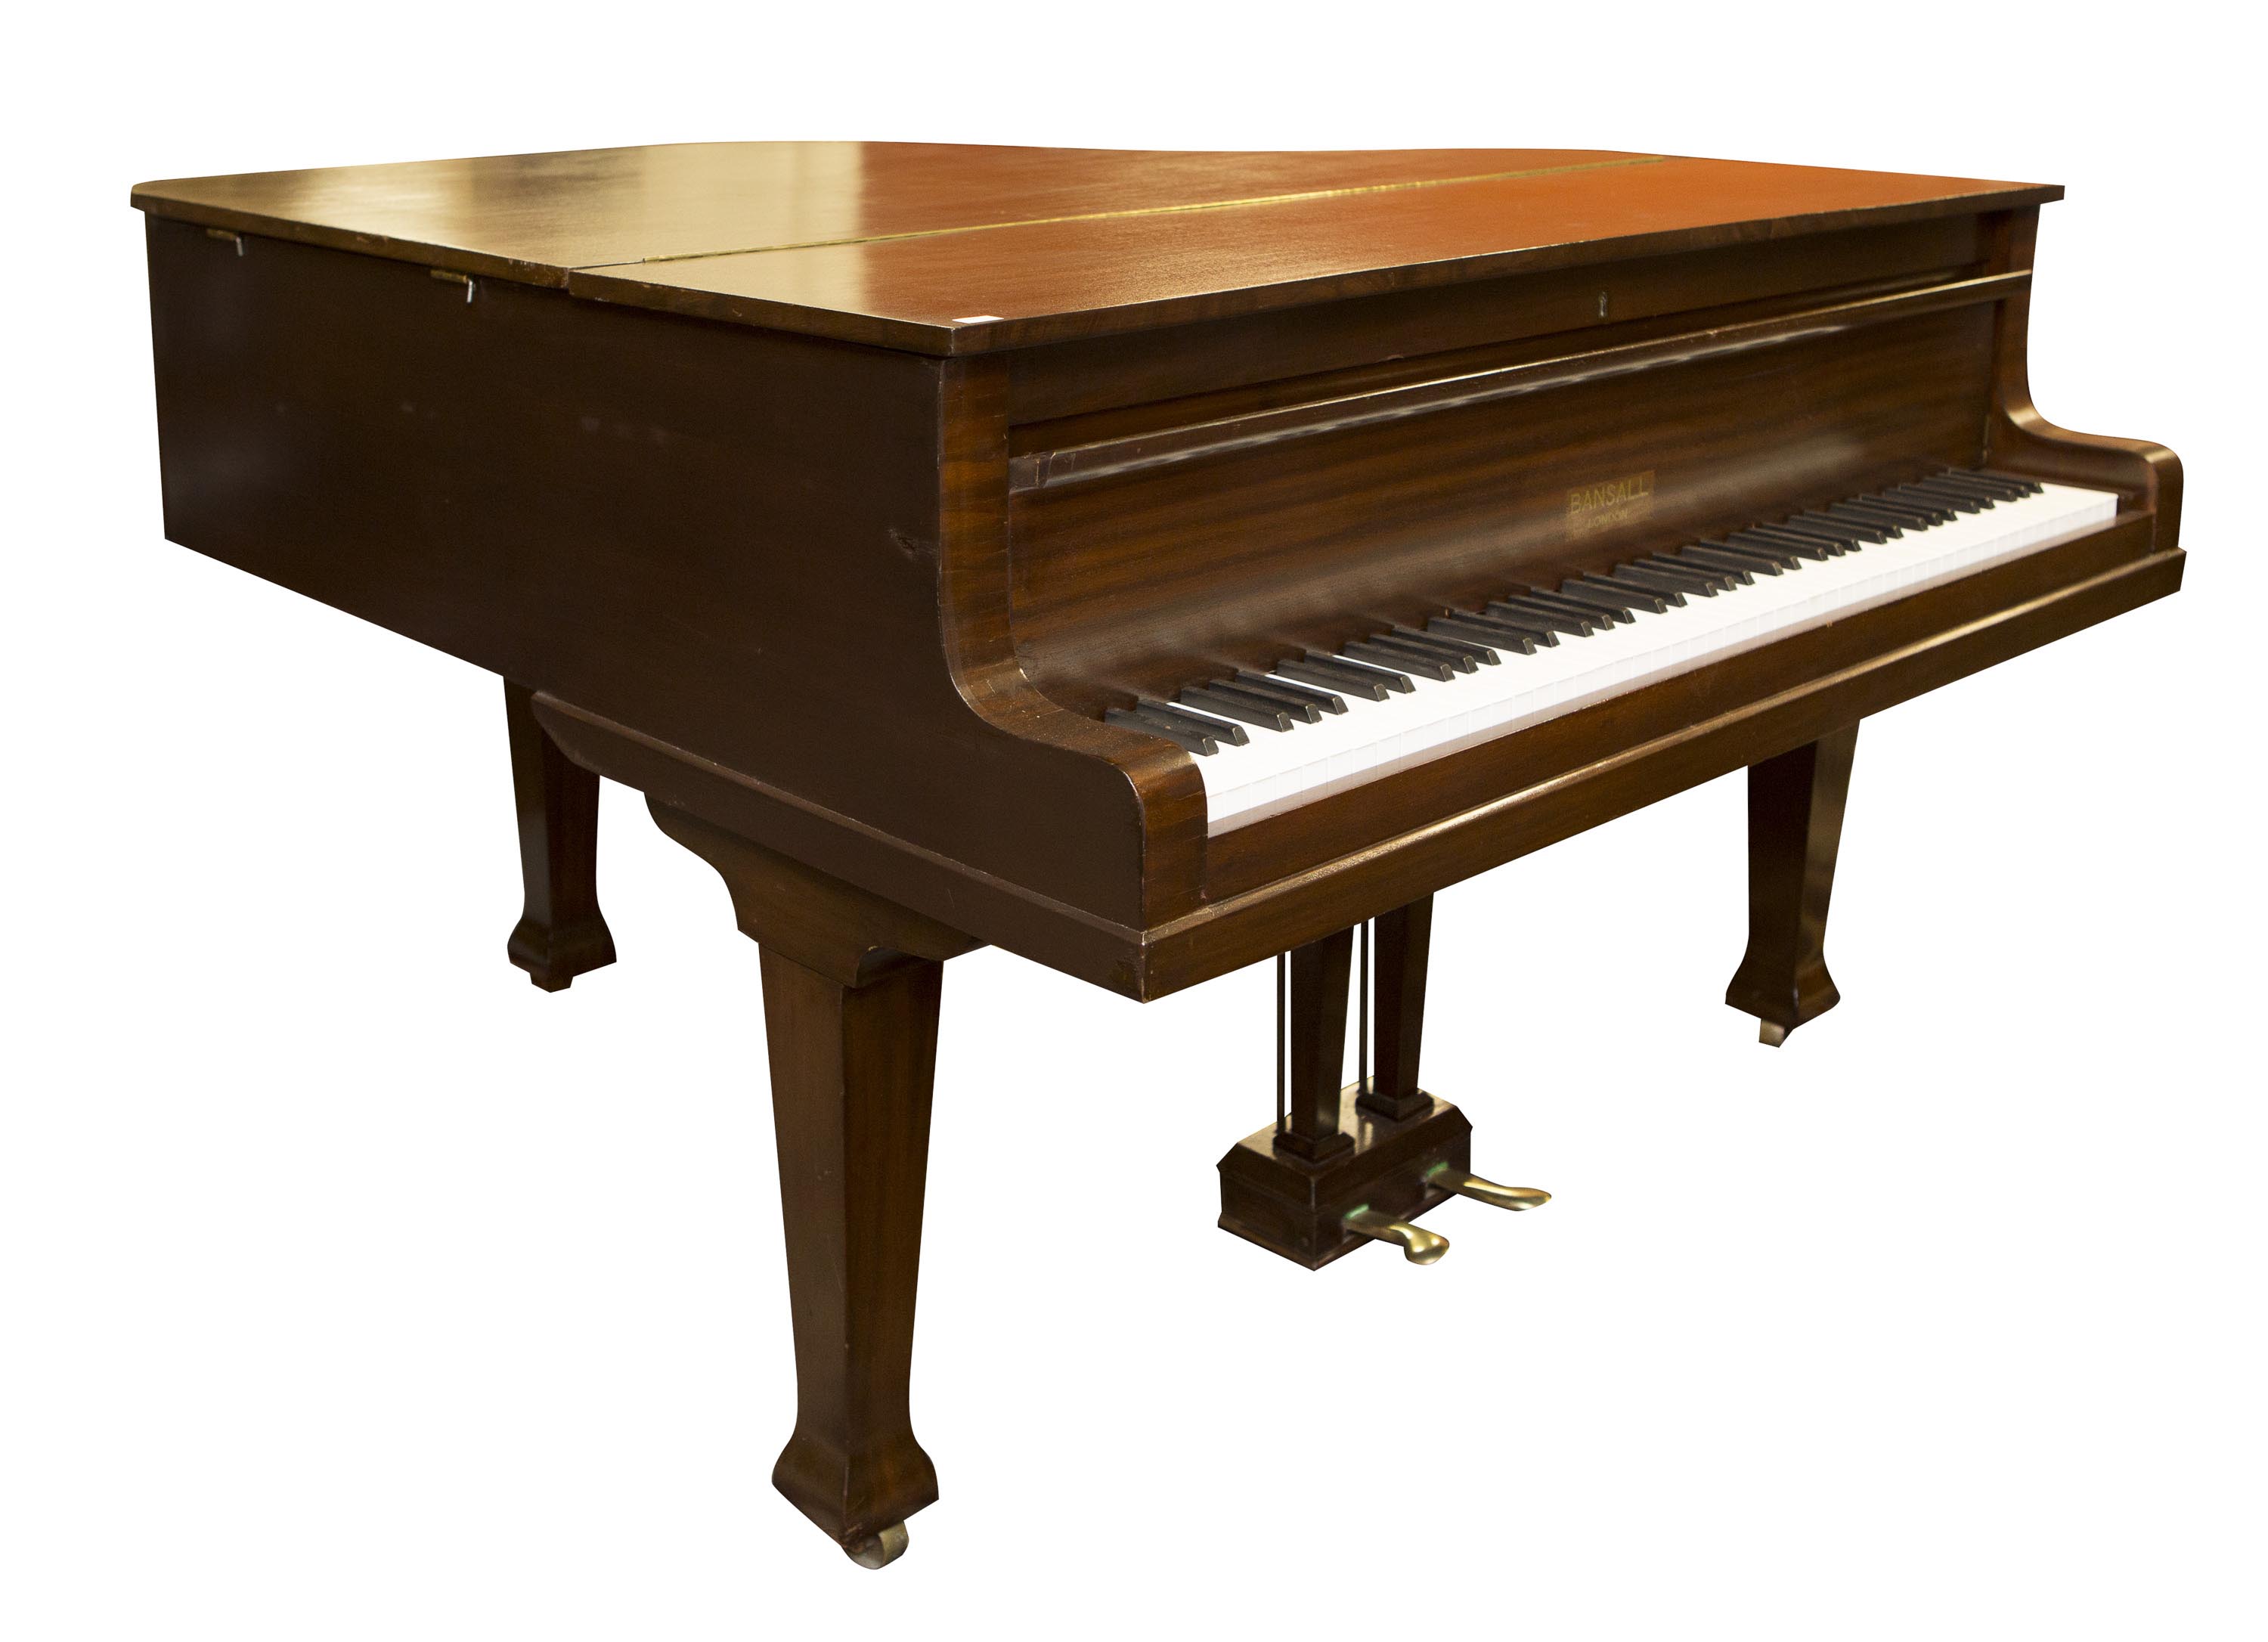 GOOD MAHOGANY CASED BOUDOIR BABY GRAND PIANO, by Bansall, London, with iron frame and 48in (122cm)